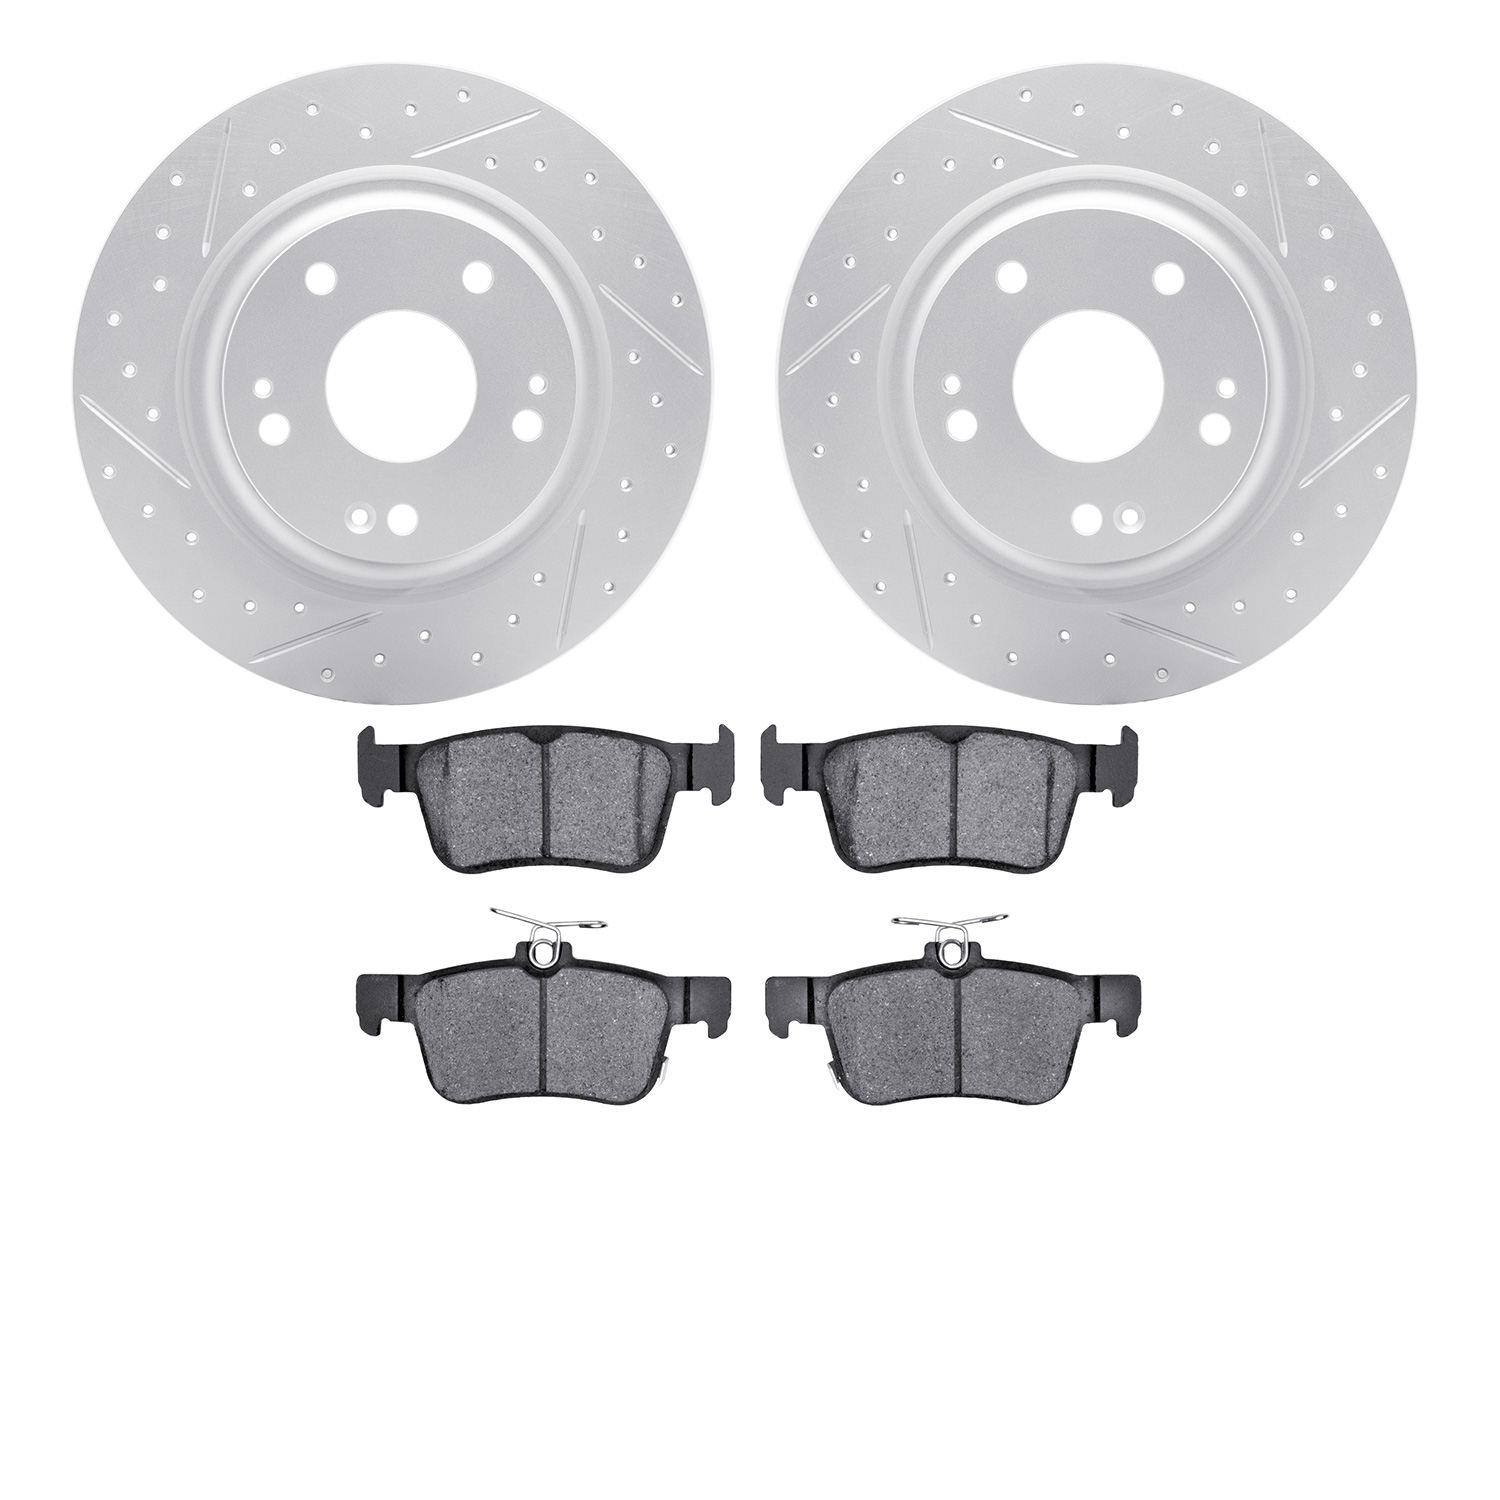 2502-59112 Geoperformance Drilled/Slotted Rotors w/5000 Advanced Brake Pads Kit, 2017-2020 Acura/Honda, Position: Rear